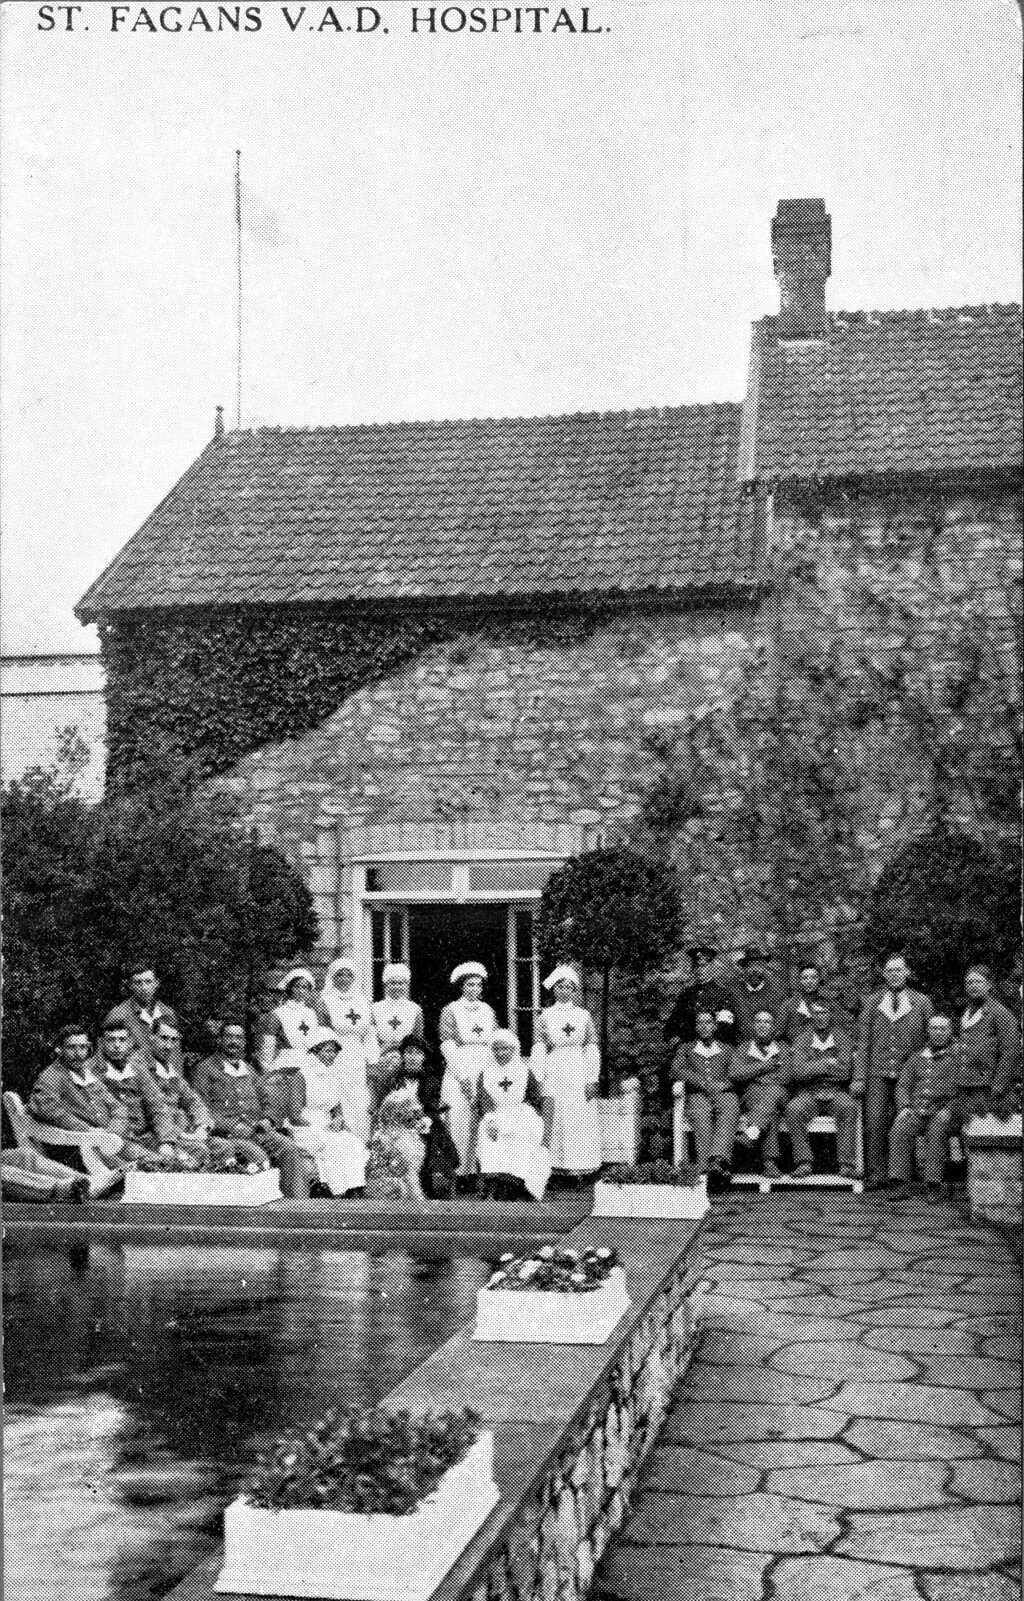 Soldiers and nurses in the Italian garden, St Fagans, during First World War